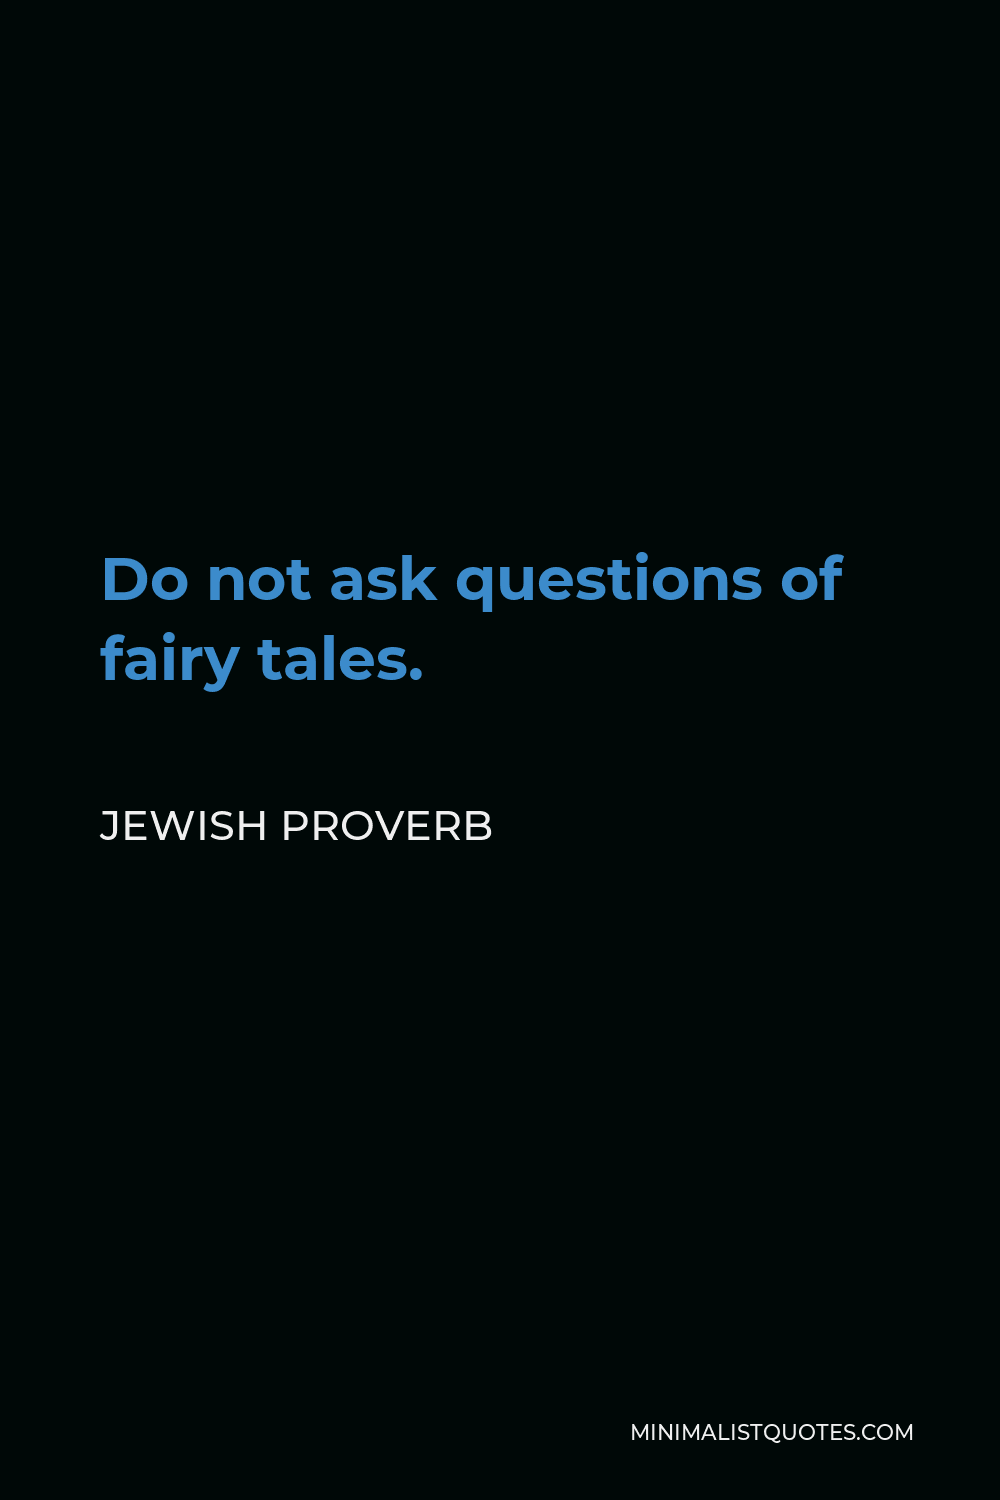 Jewish Proverb Quote - Do not ask questions of fairy tales.